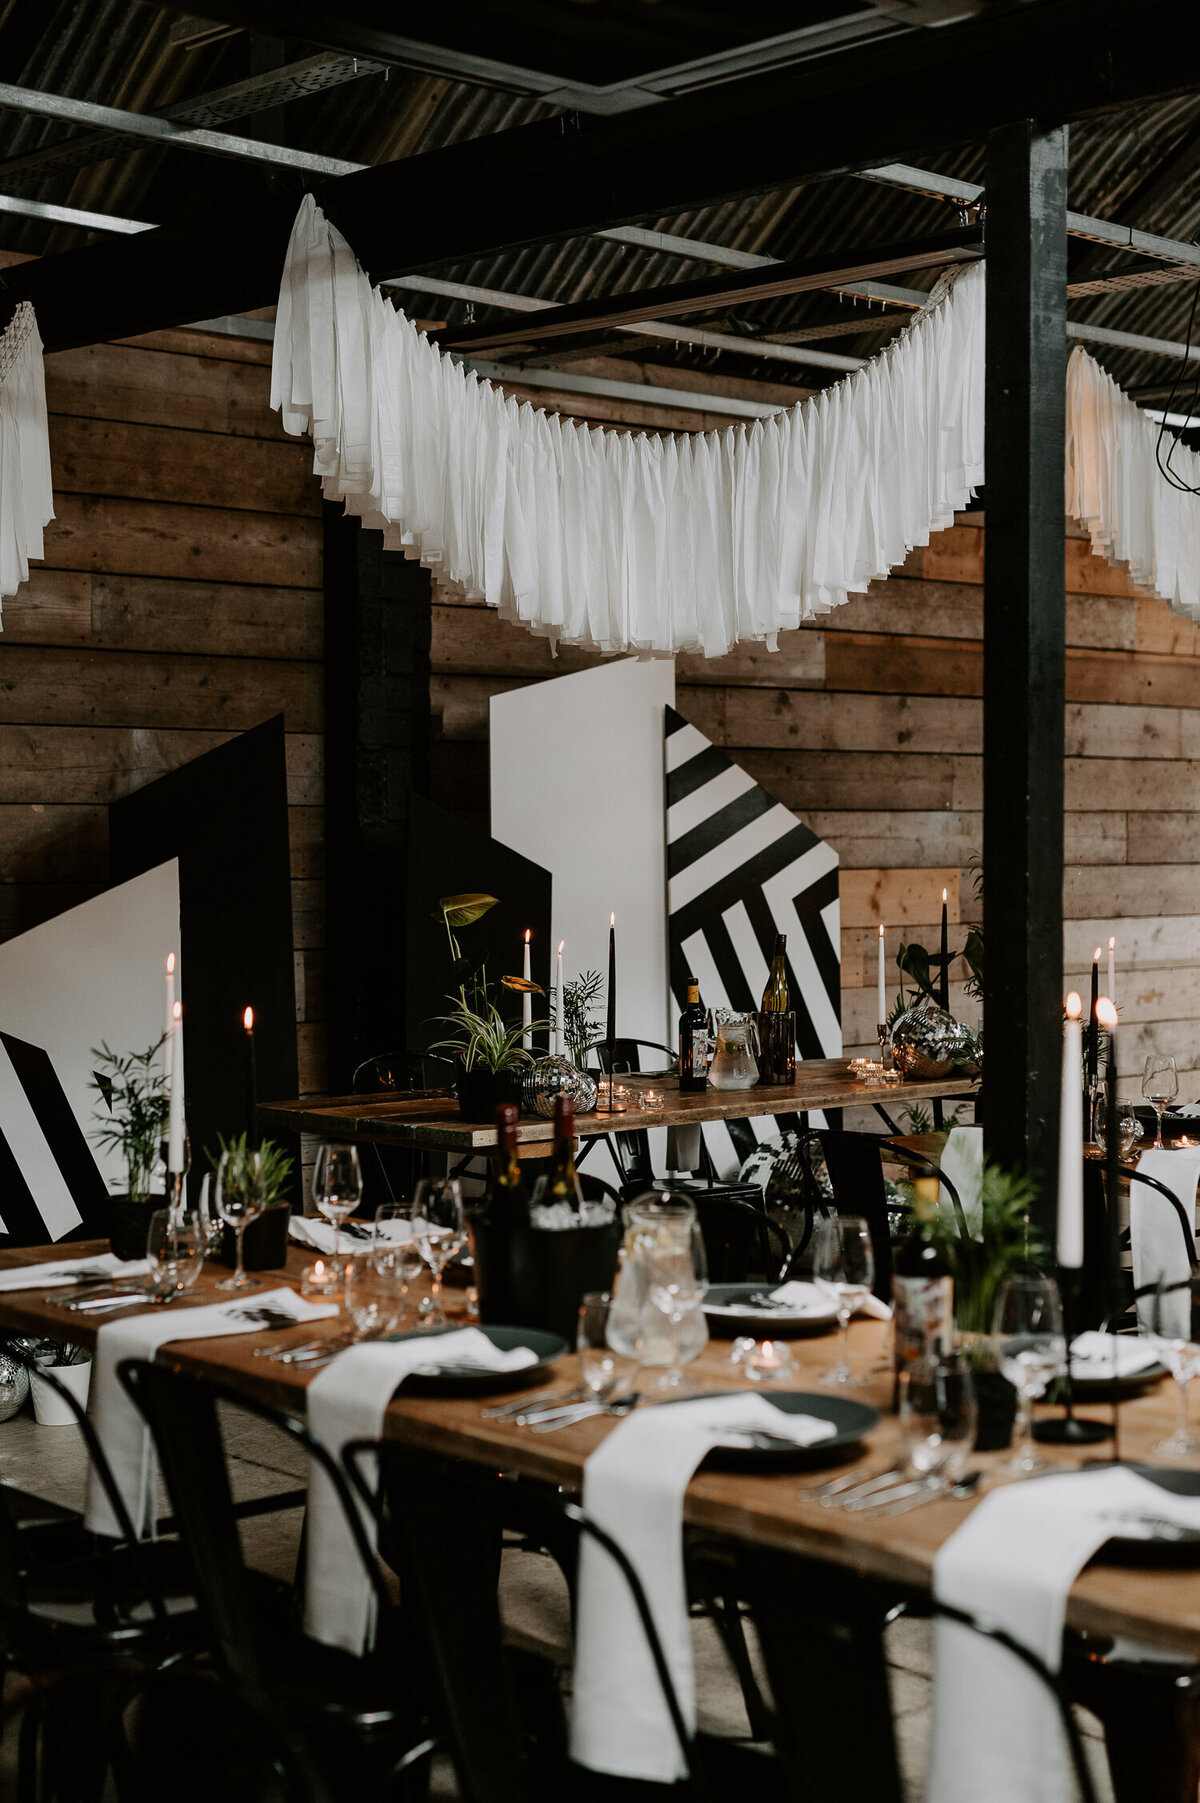 The Shack Revolution is set out for dinner with trestle tables, black and white boards are placed at a head table and black plates sit under white napkins. Plants are scattered around the room to give the space more green.